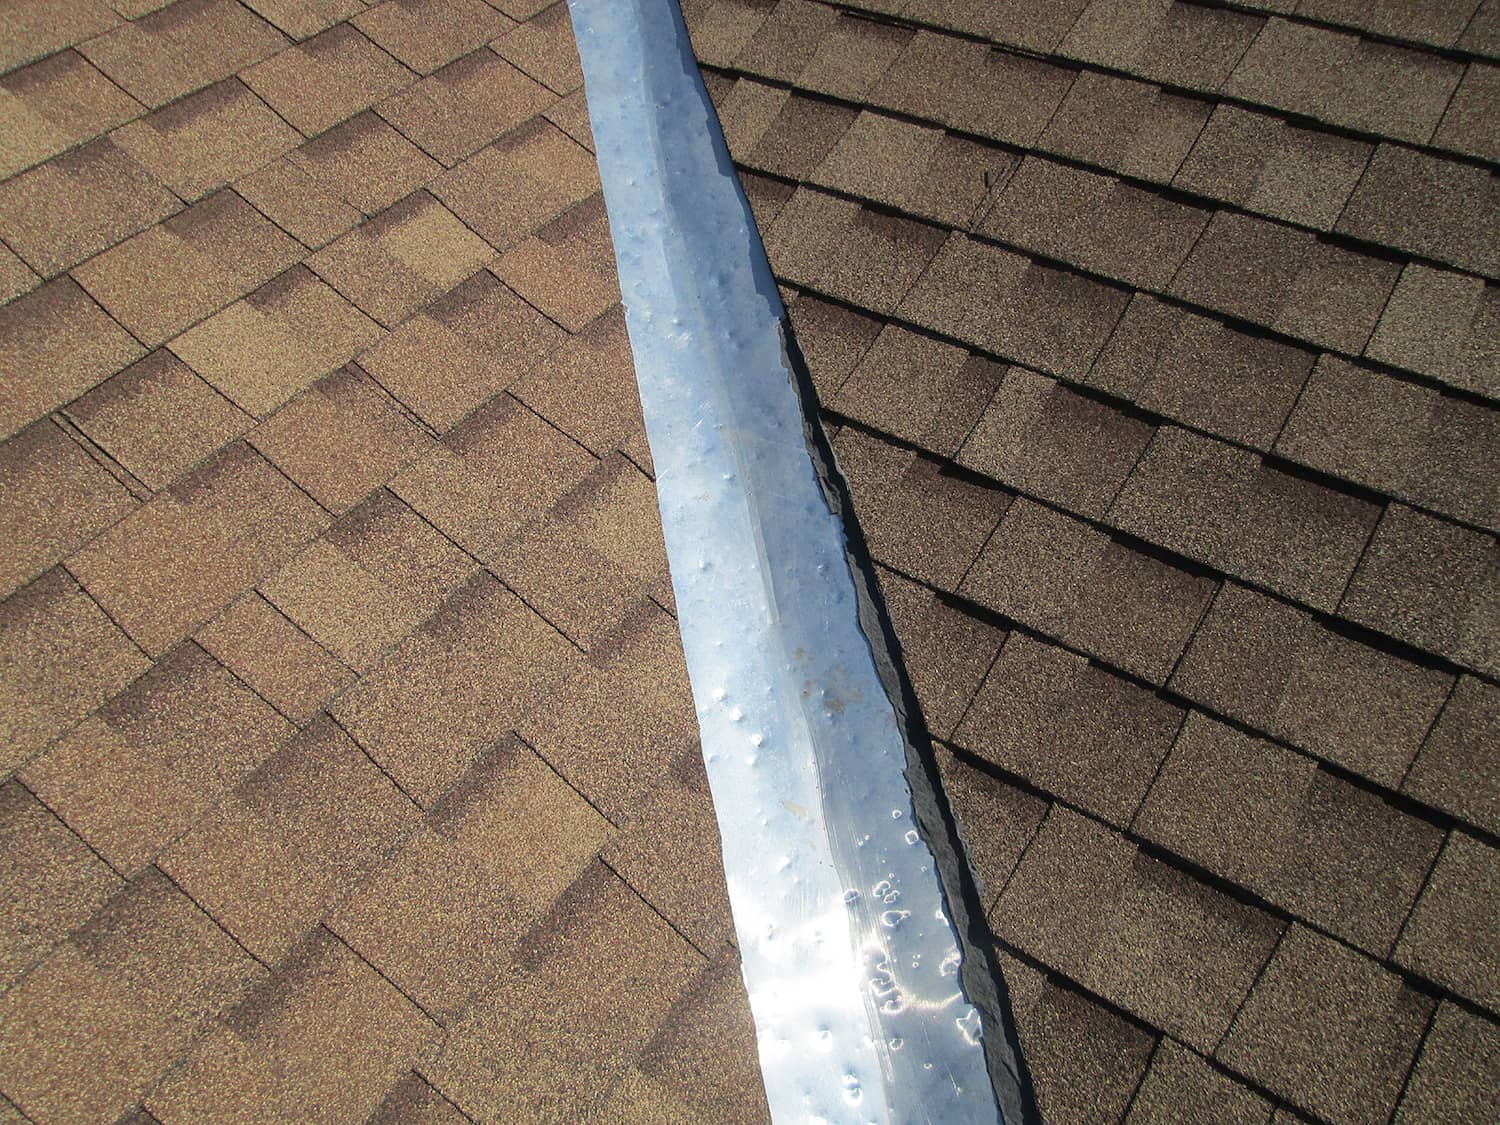 how much hail damage to replace roof
flashing